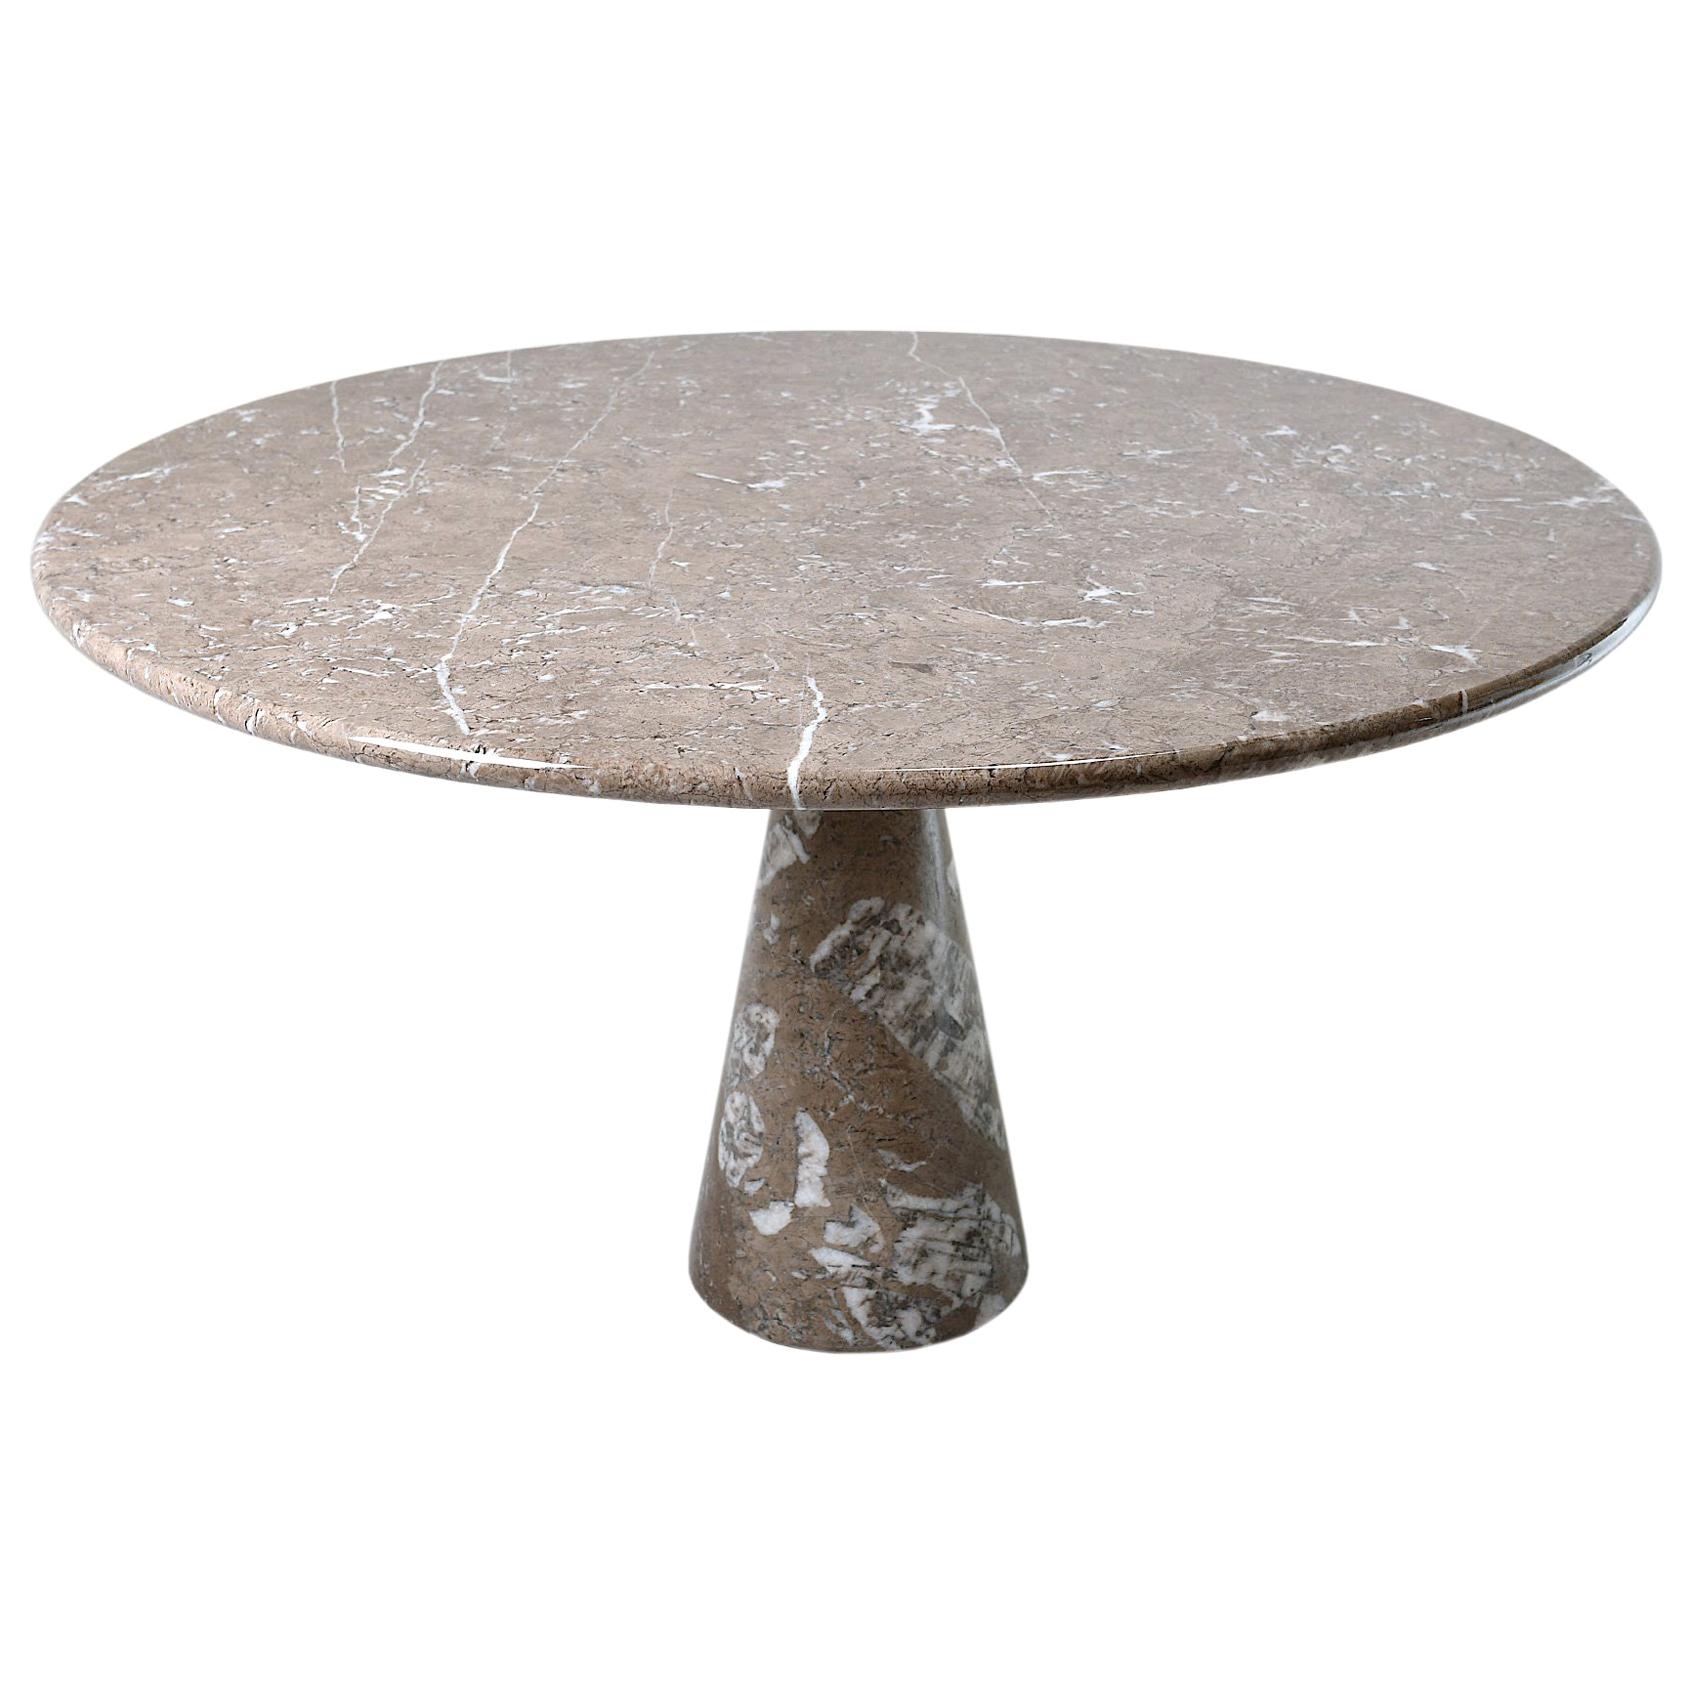 Mid-Century Modern Angelo Mangiarotti Marble Dining Table 1972 by Skipper, Italy